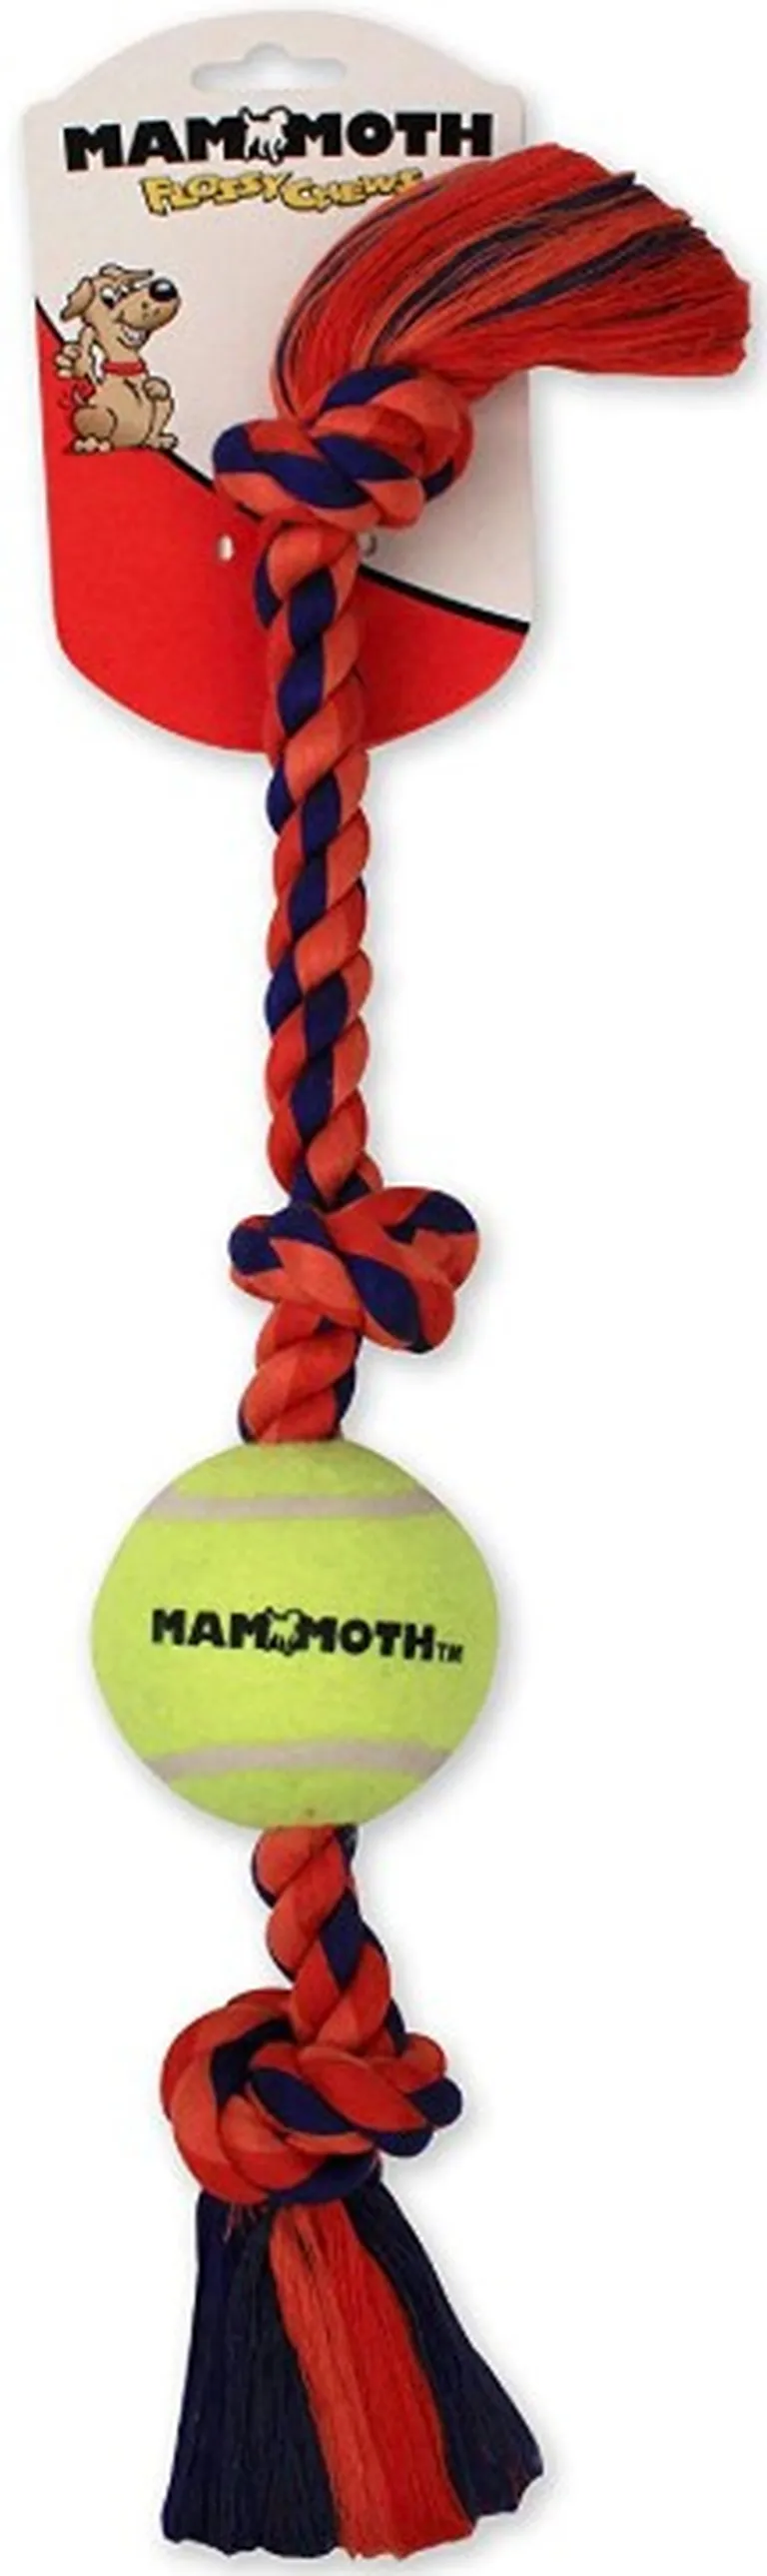 Mammoth Pet Flossy Chews Color 3 Knot Tug with Tennis Ball Mini Assorted Colors Photo 2